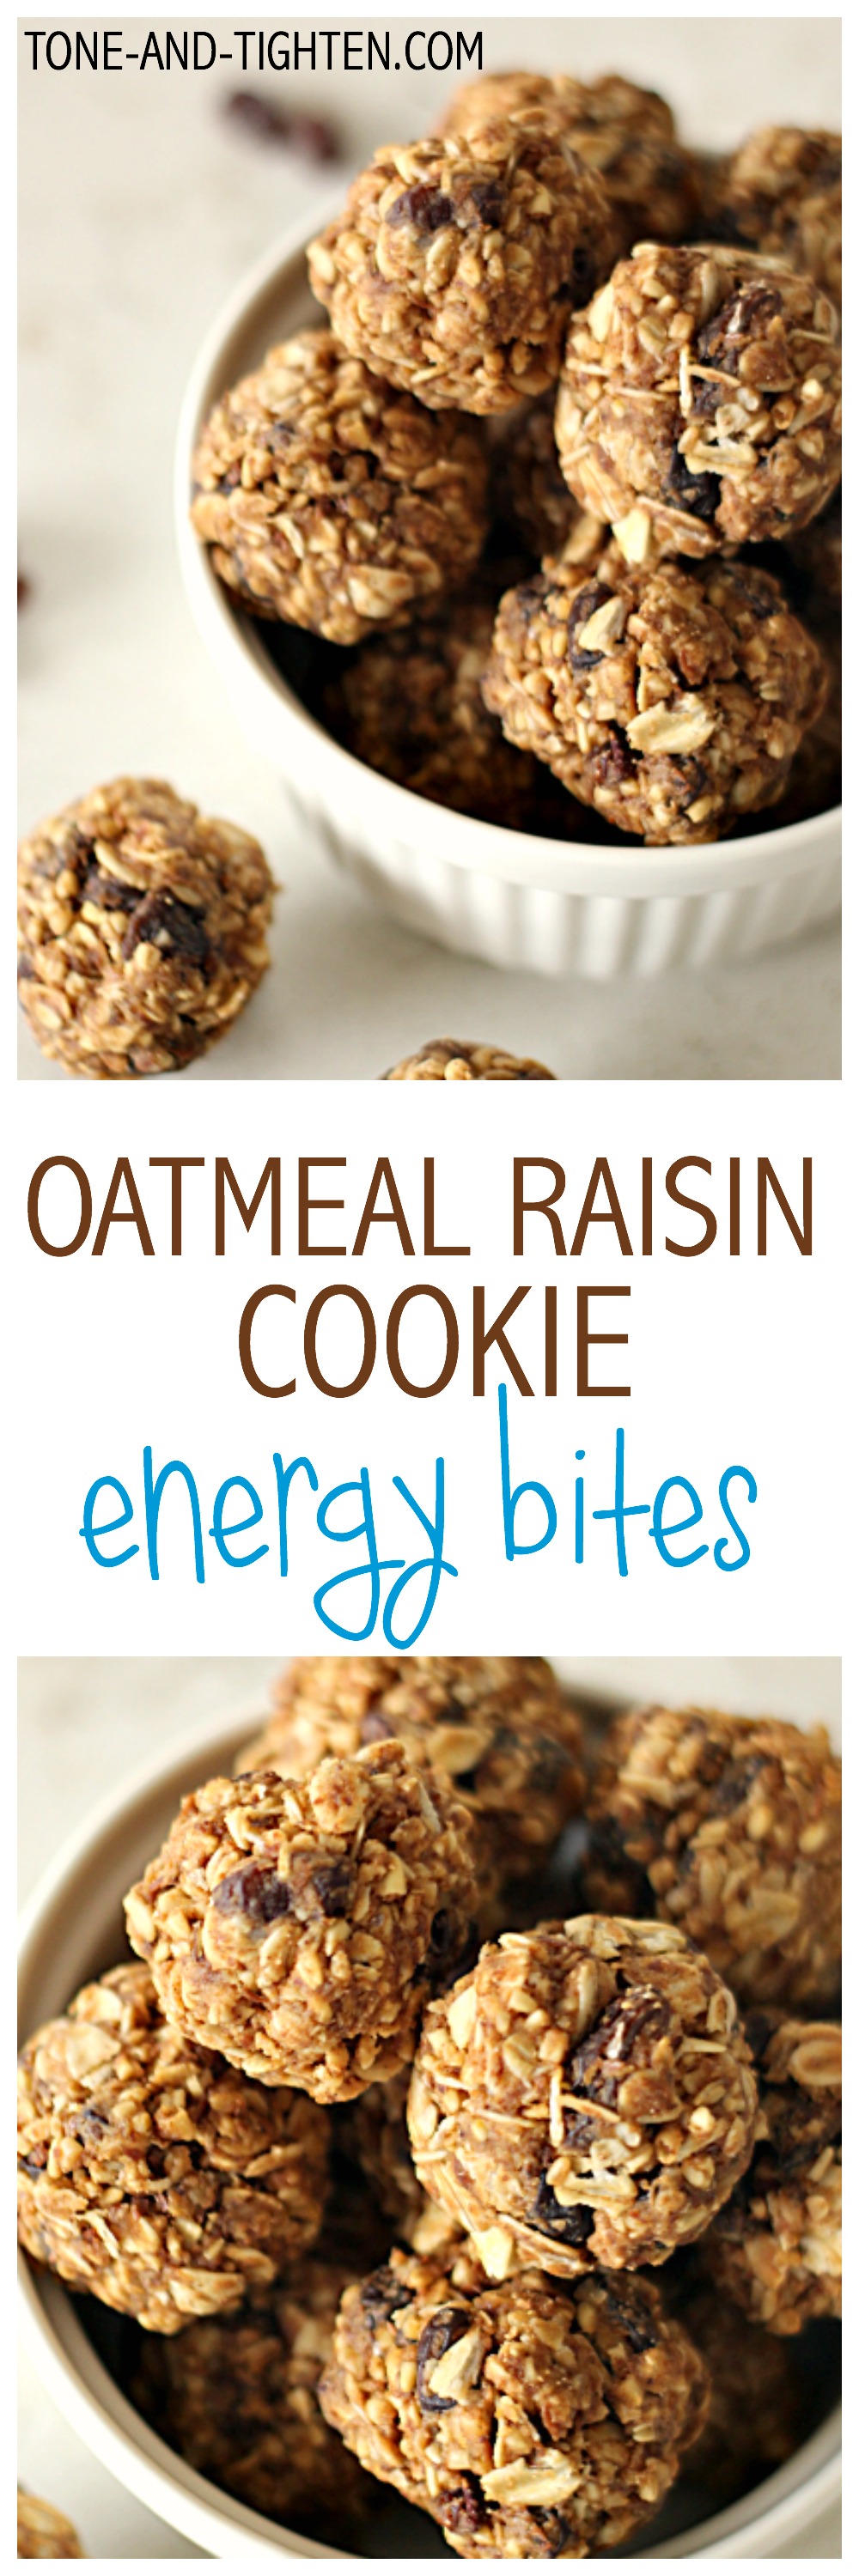 Oatmeal Raisin Cookie Energy Bites from Tone-and-Tighten.com